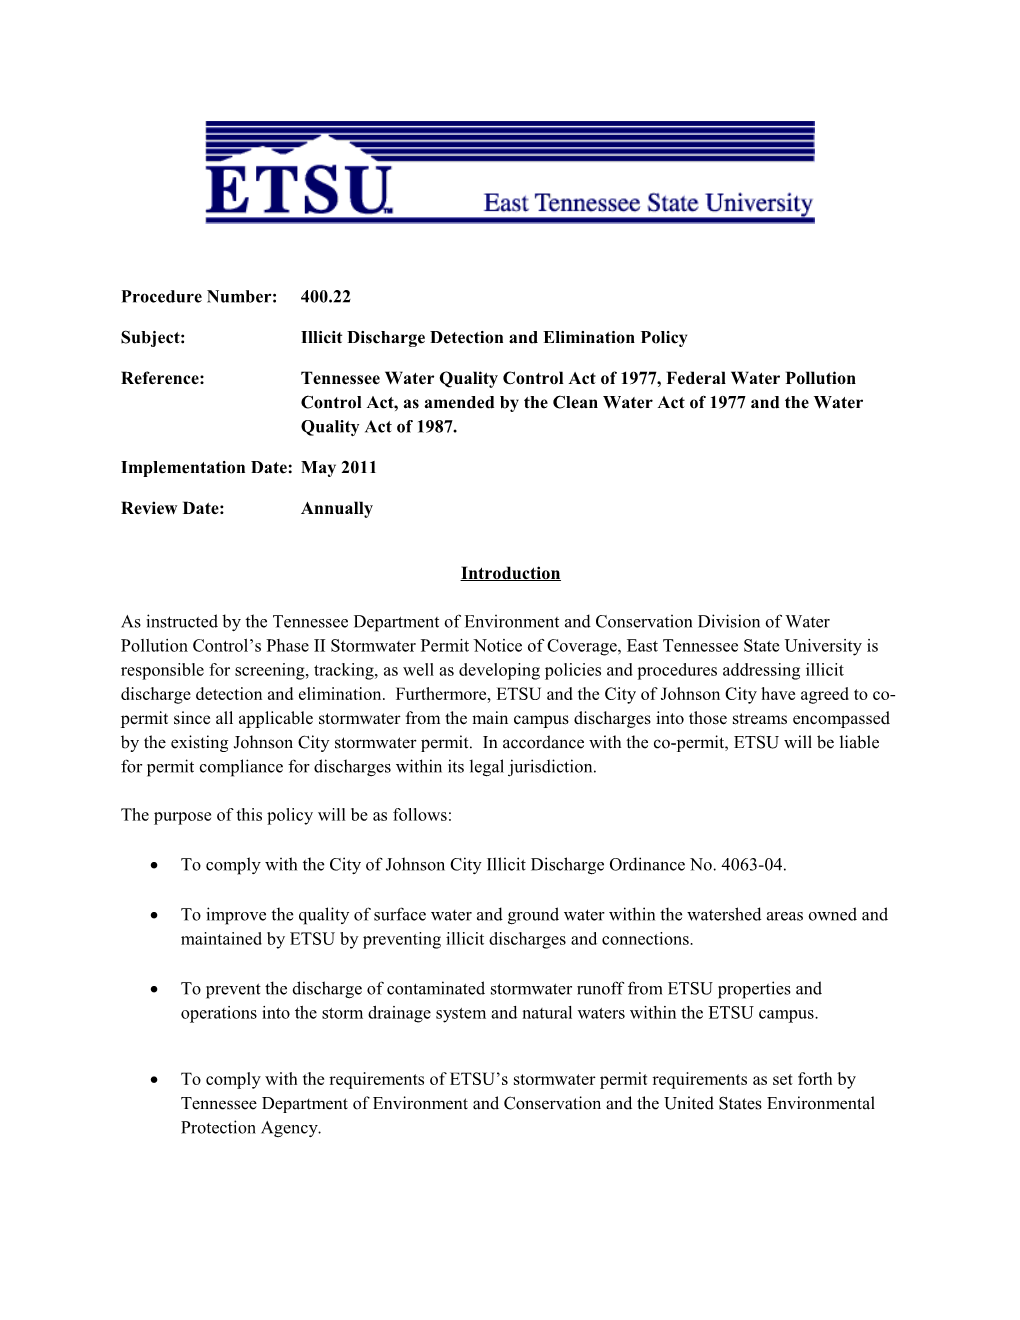 Subject: Illicit Discharge Detection and Elimination Policy